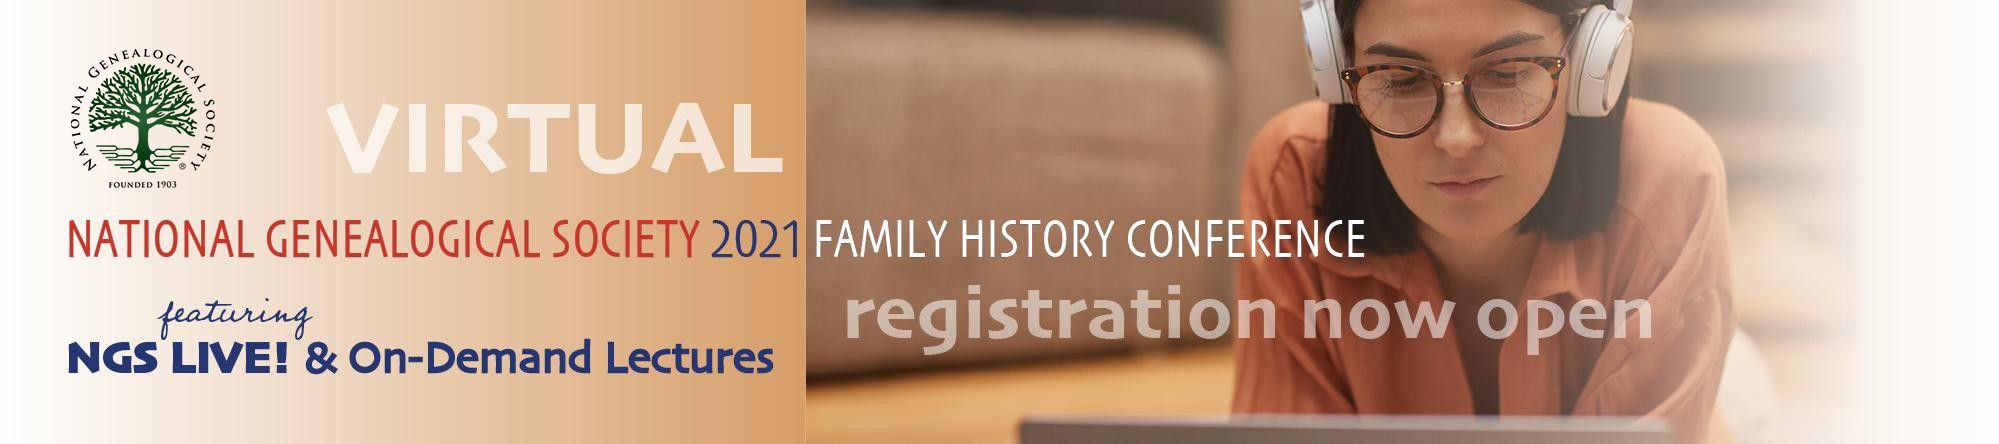 National Genealogical Society’s Virtual Conference